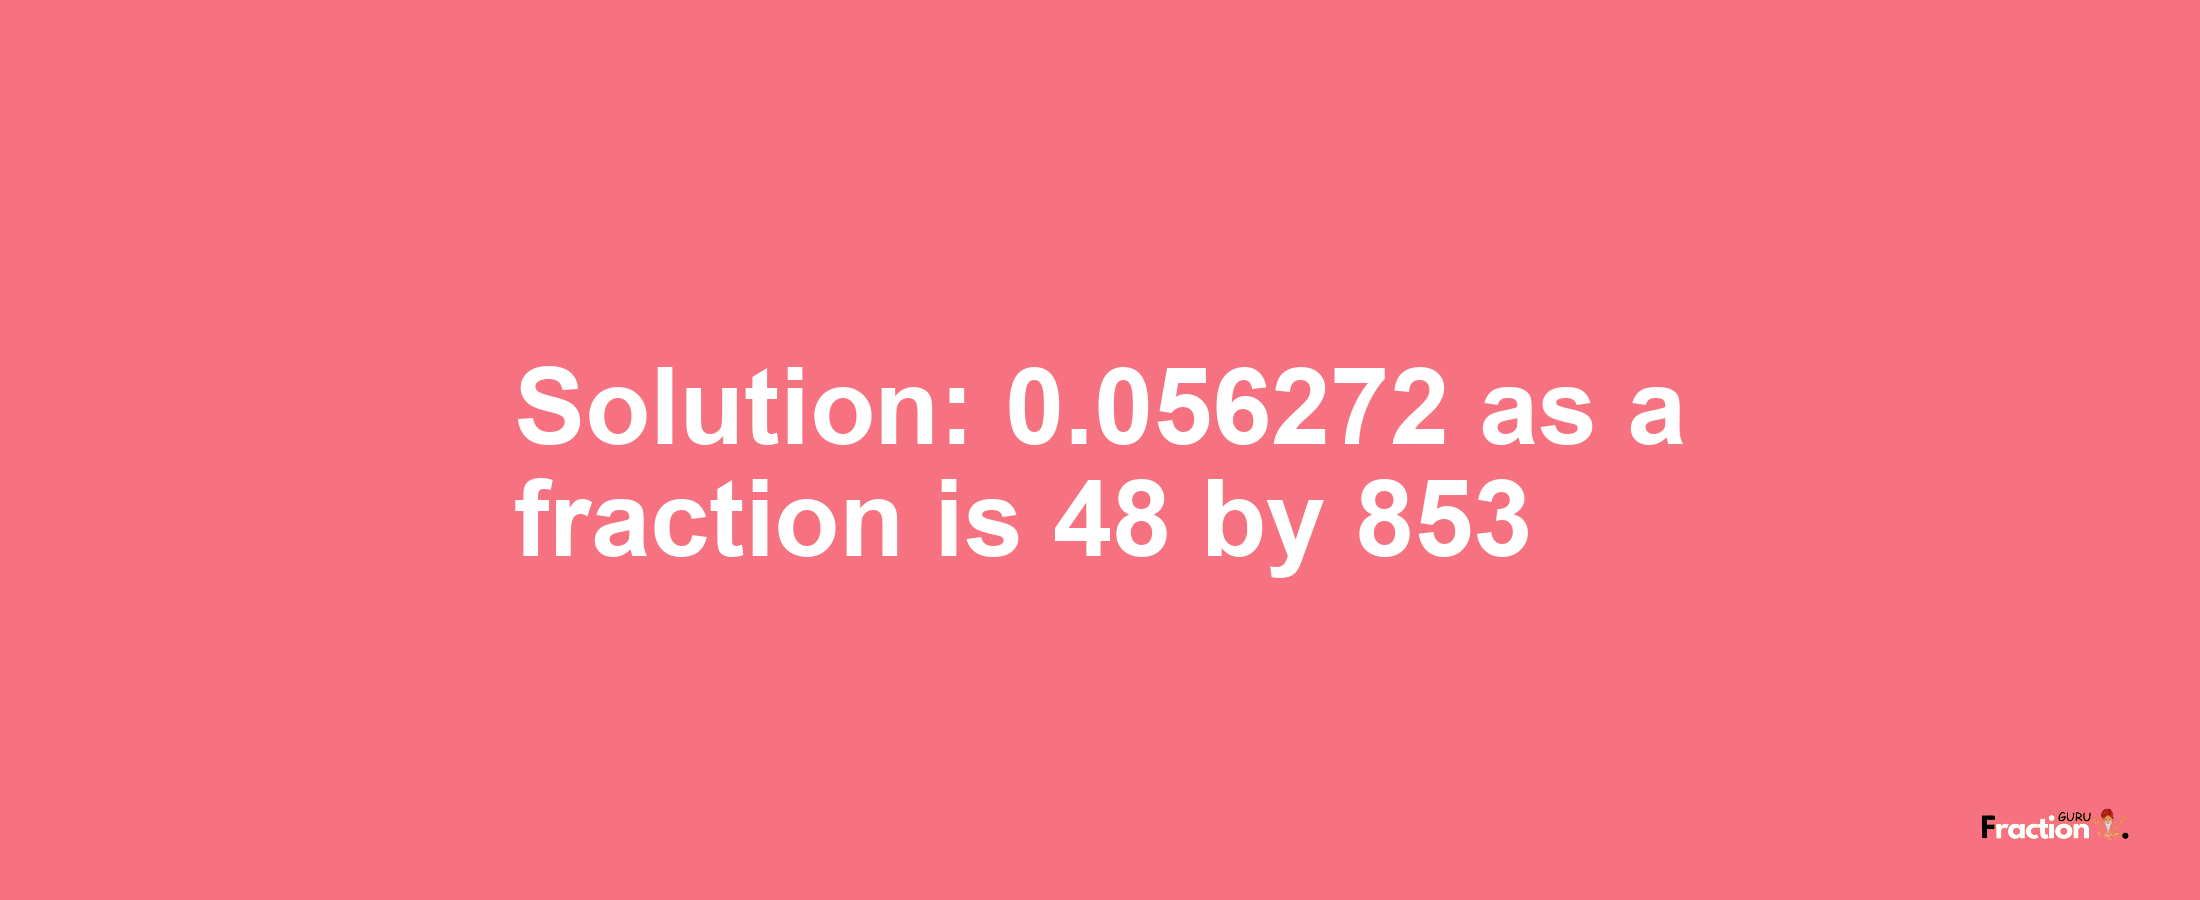 Solution:0.056272 as a fraction is 48/853